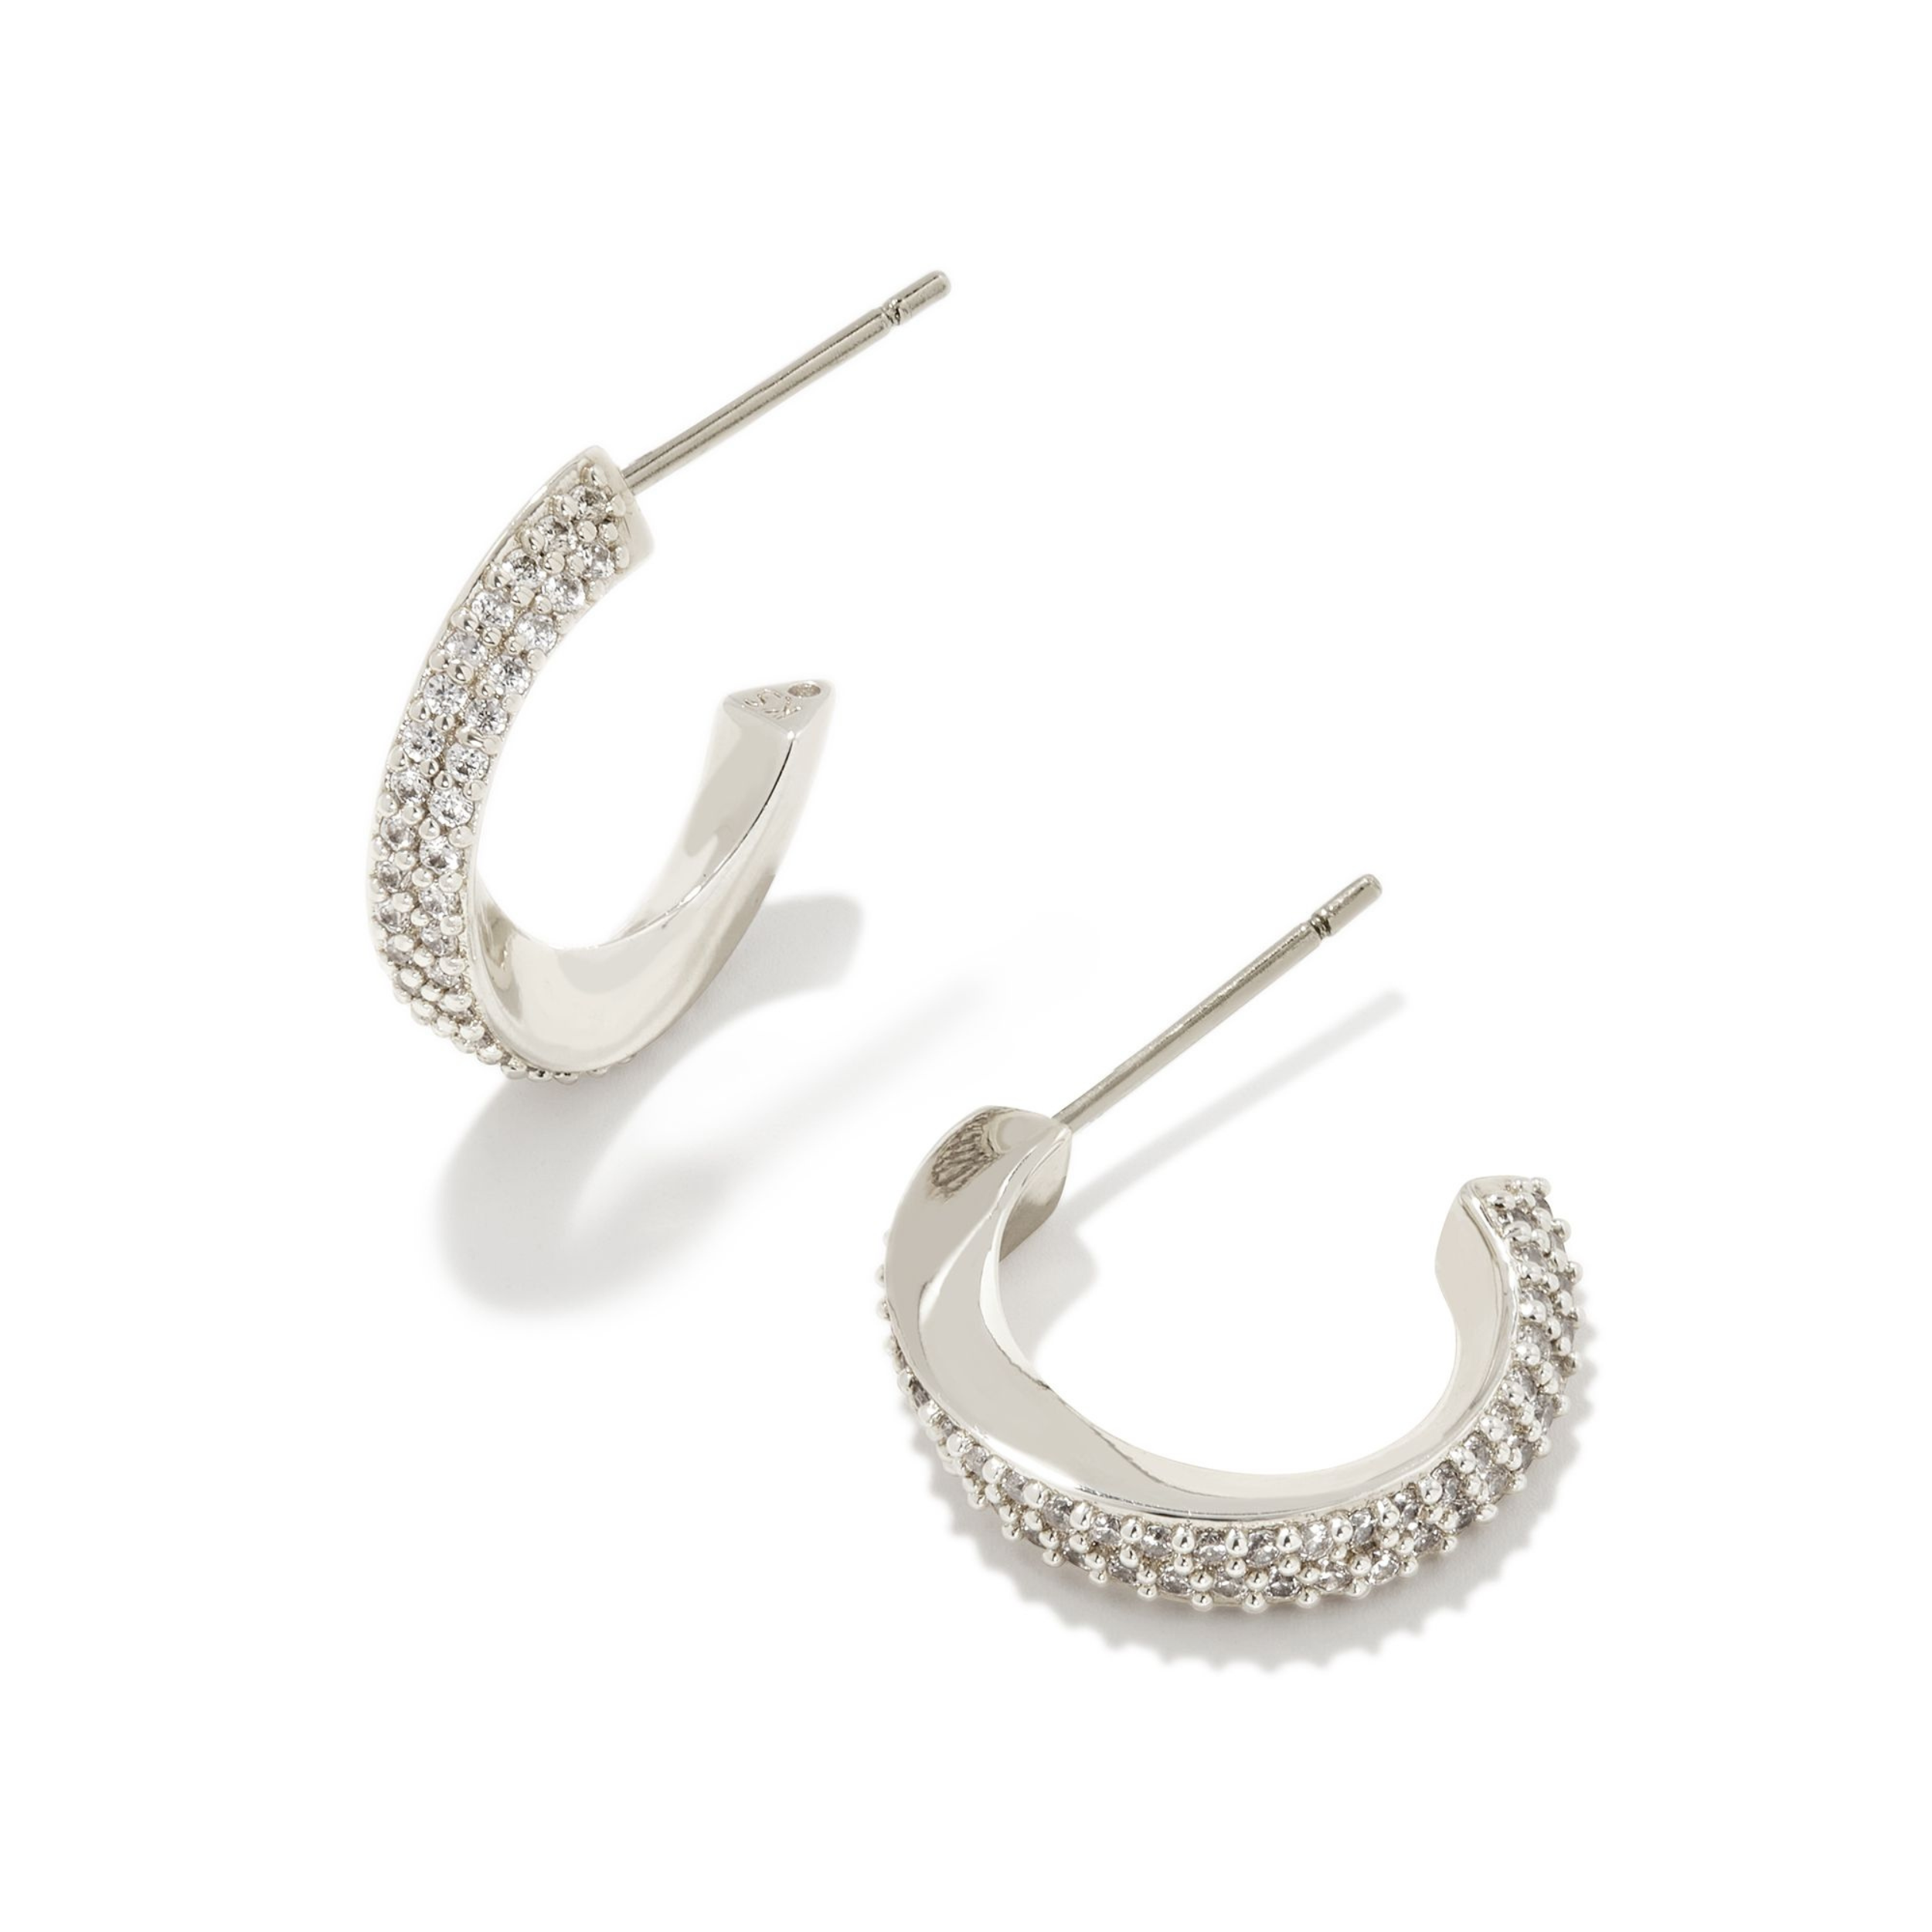 Silver hoop huggie twist earrings with cz crystals pictured on a white background. 